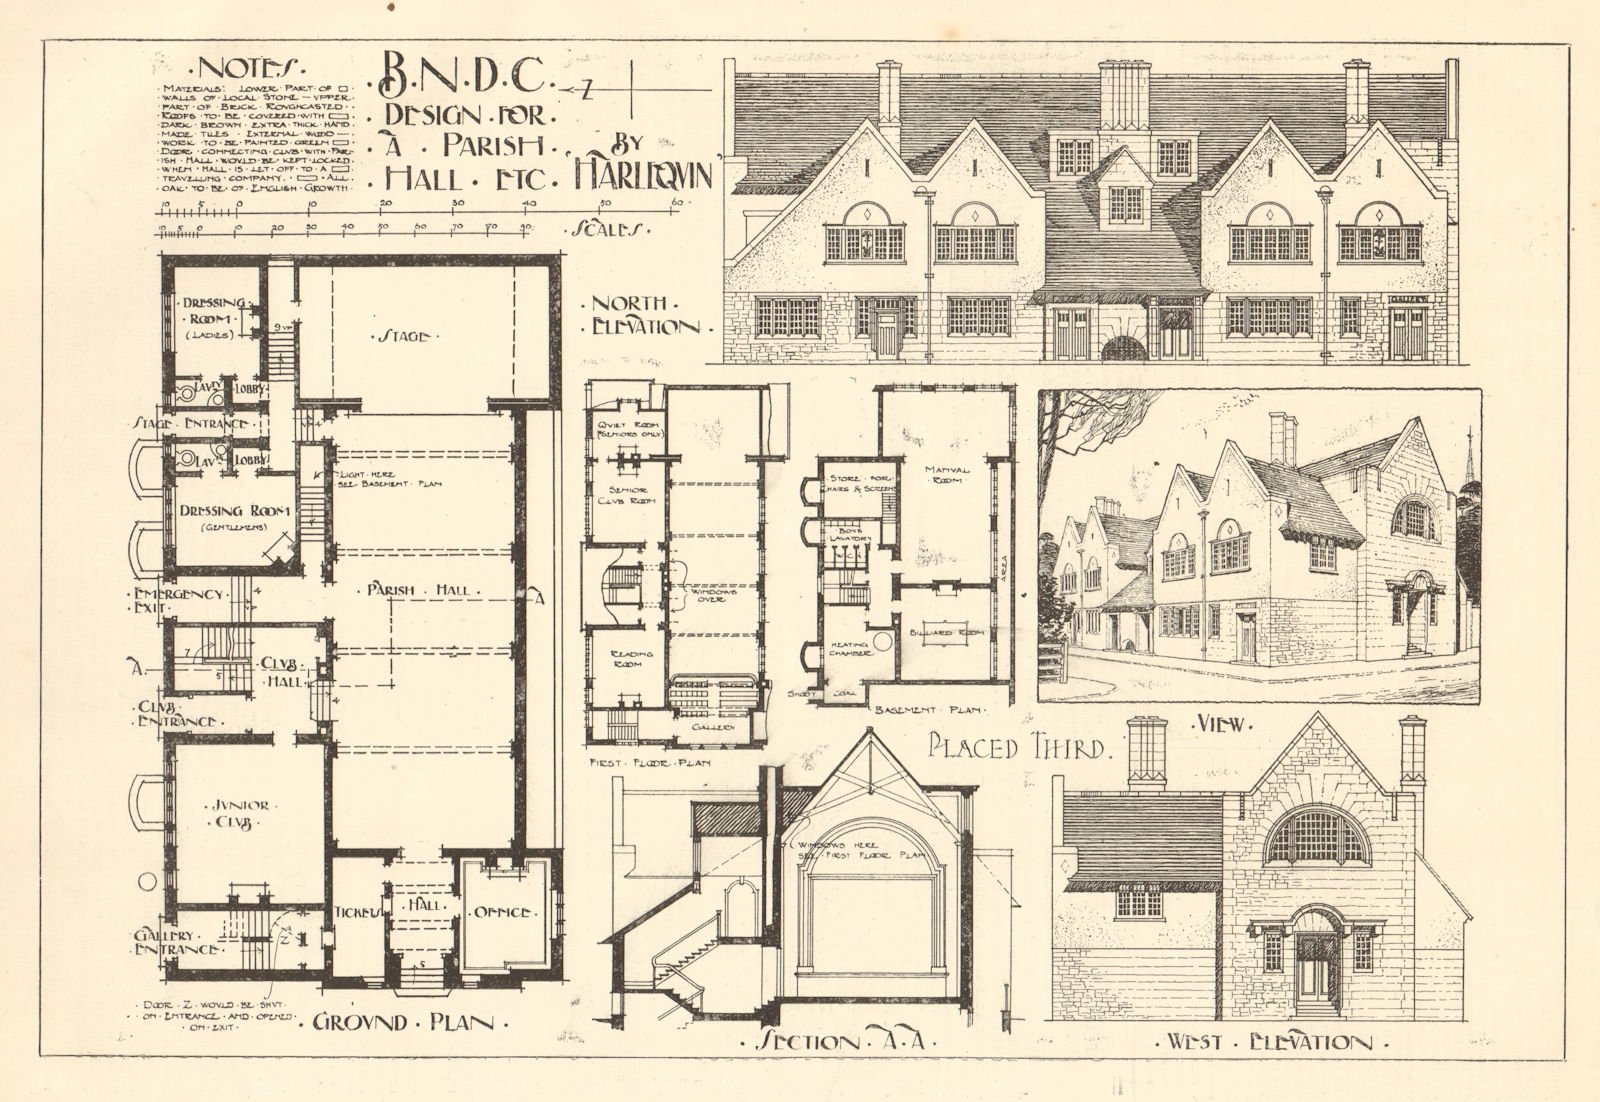 Design for a Parish Hall etc, by Harlequin. View, elevations & plans 1907